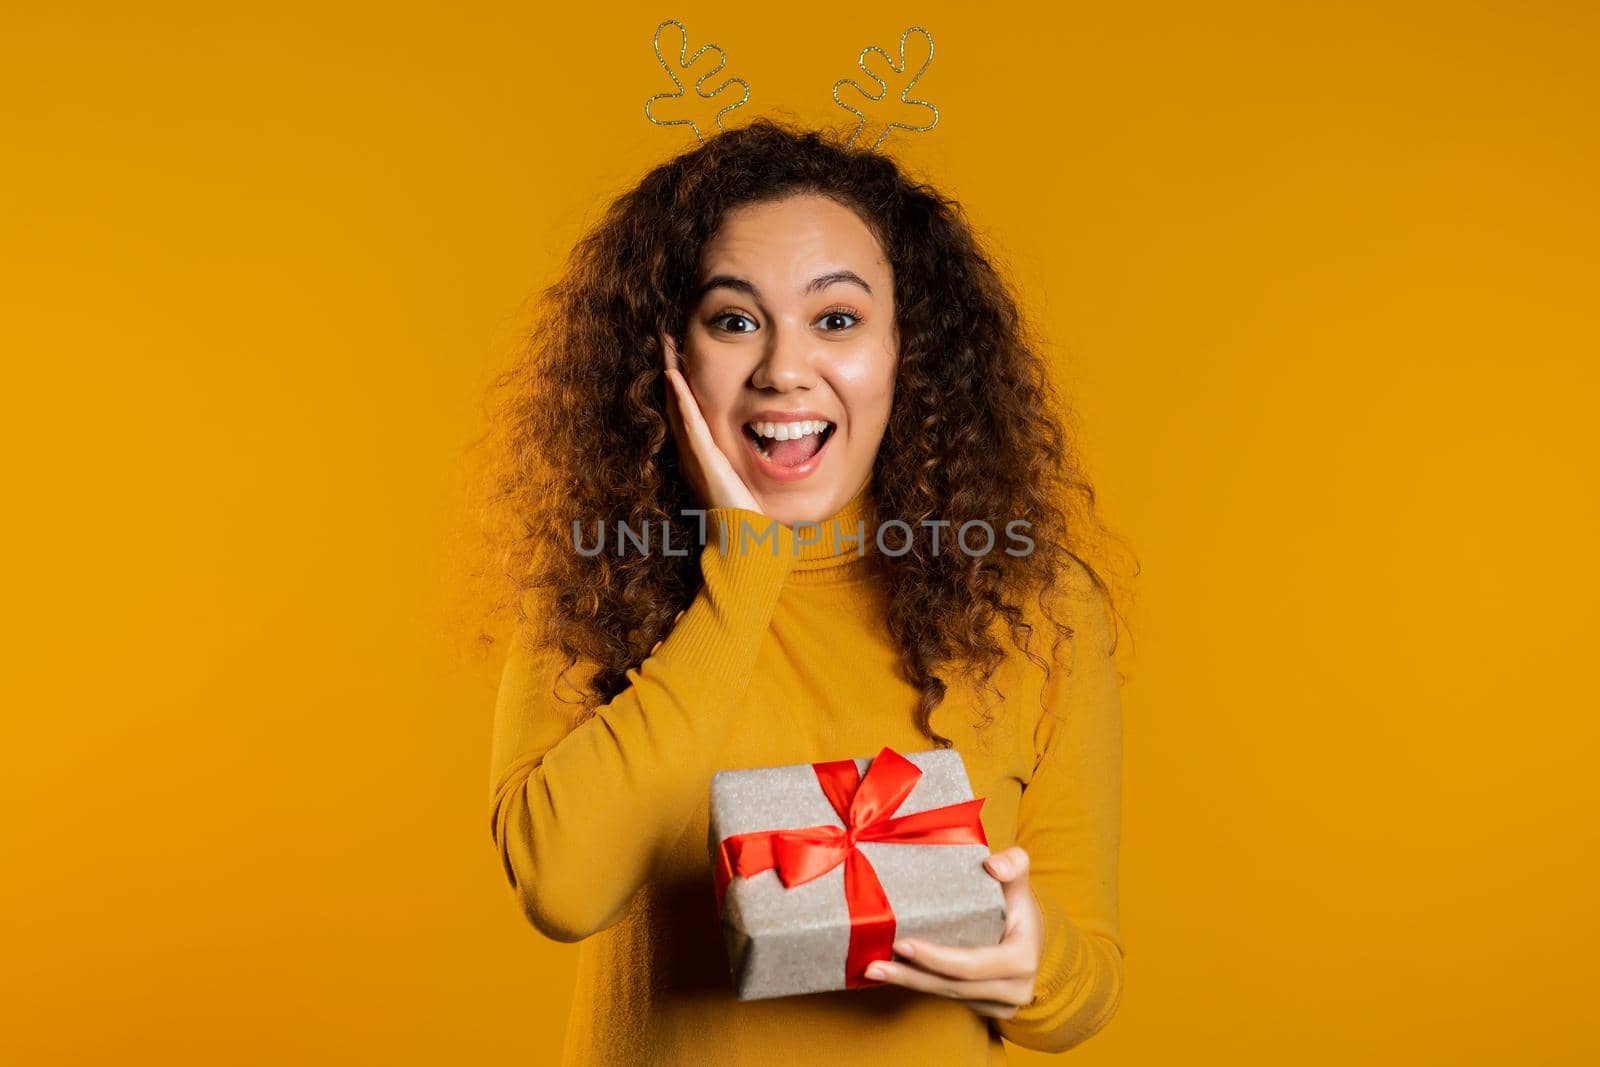 urprised mixed race woman smiling and holding gift box on yellow studio background. Girl with curly hairstyle in sweater. Christmas mood. by kristina_kokhanova